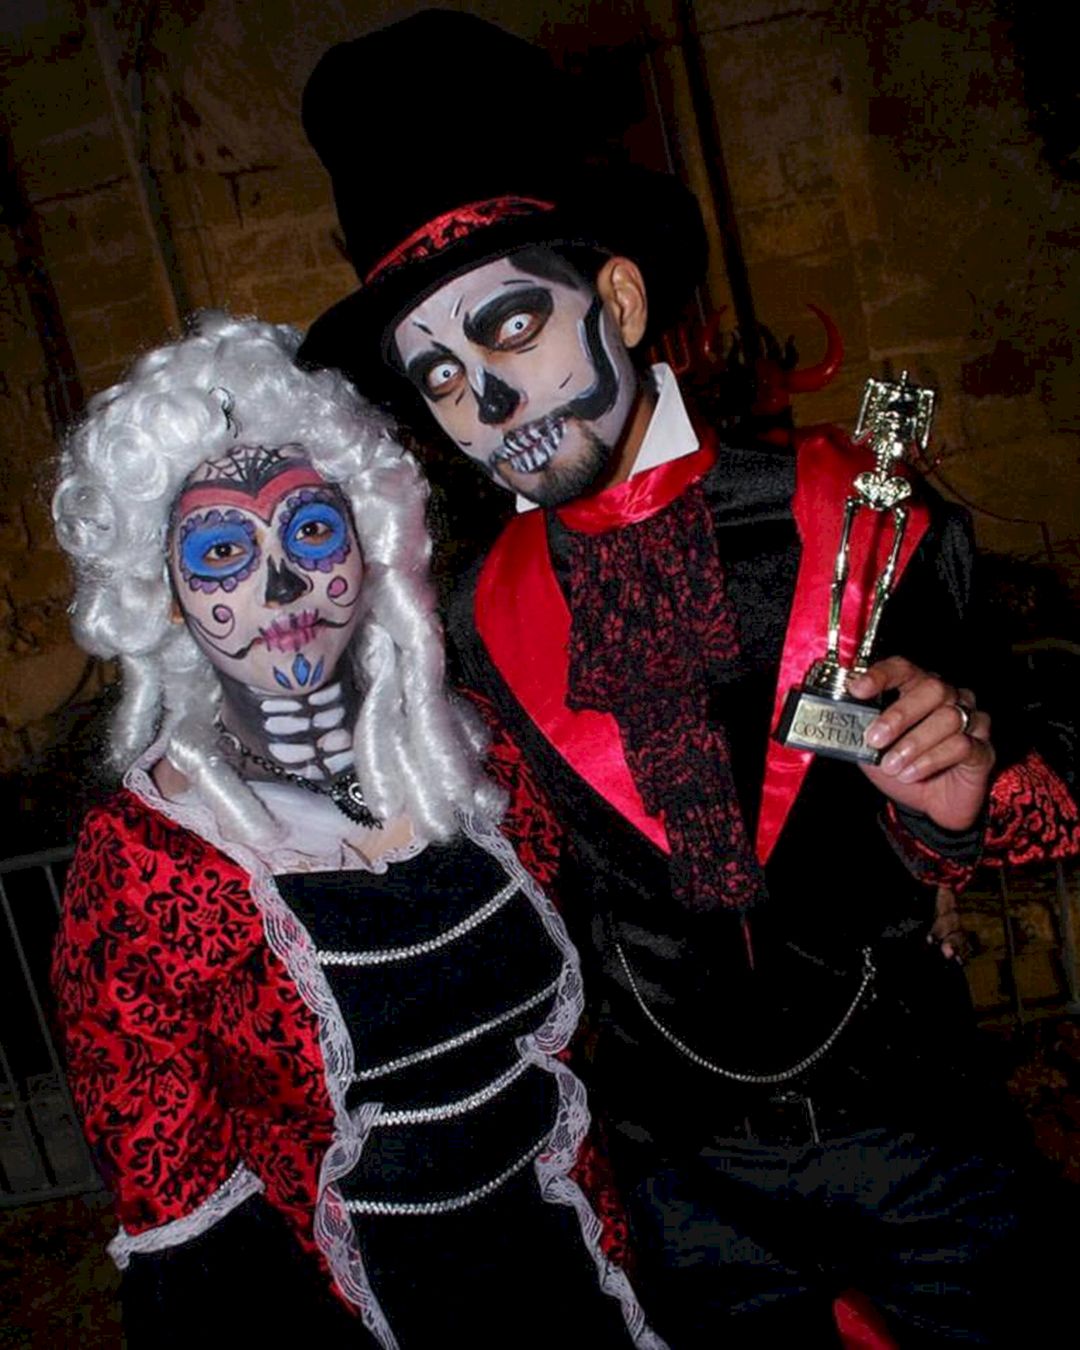 Horror couple costumes from blurmark